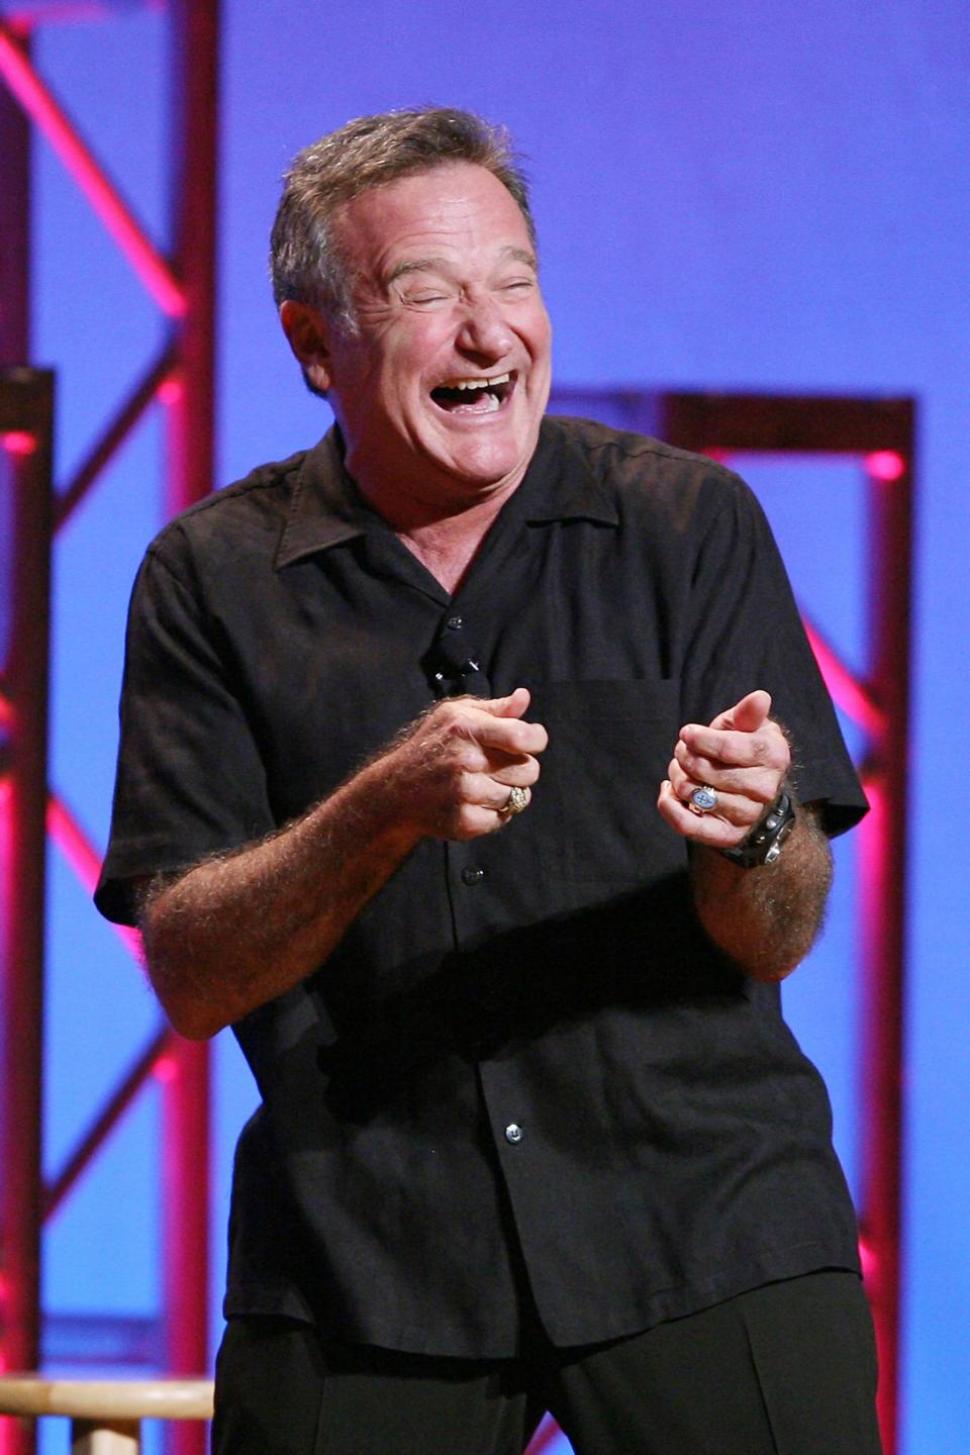 Robin Williams performing his stand-up show, “Weapons of Self Destruction,” at Town Hall in New York.